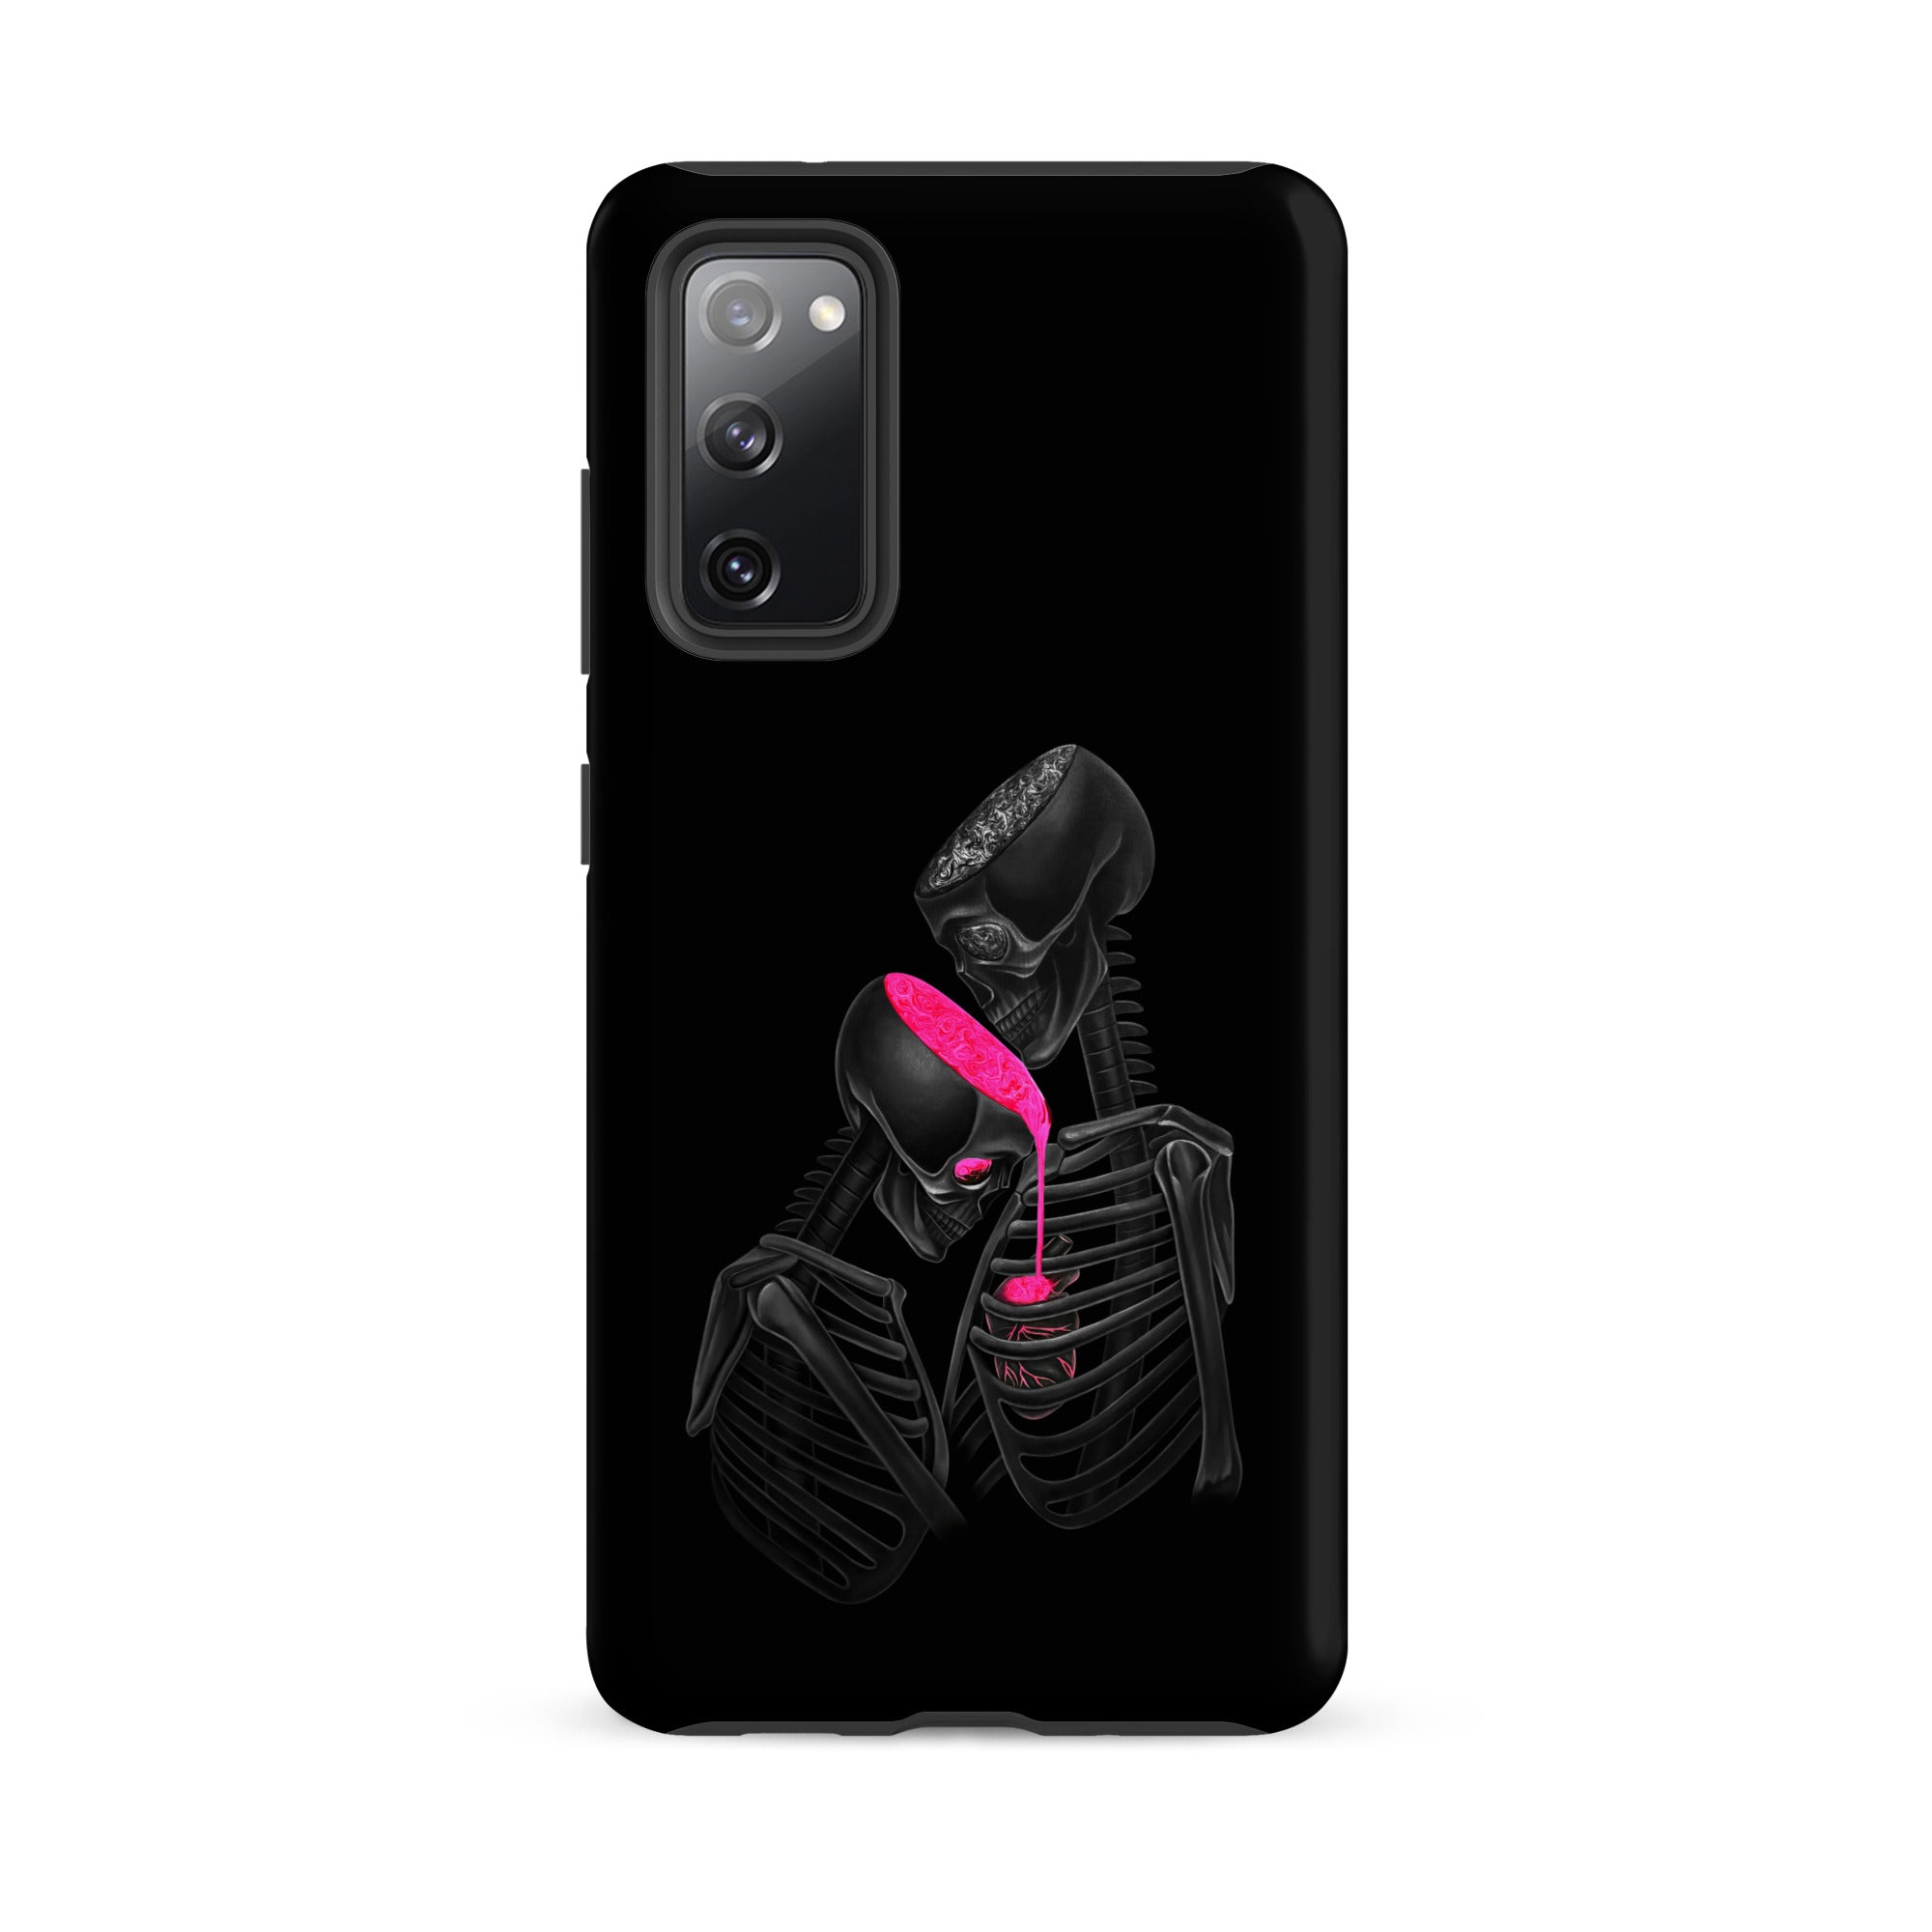 Bring Me to Life Samsung® Case